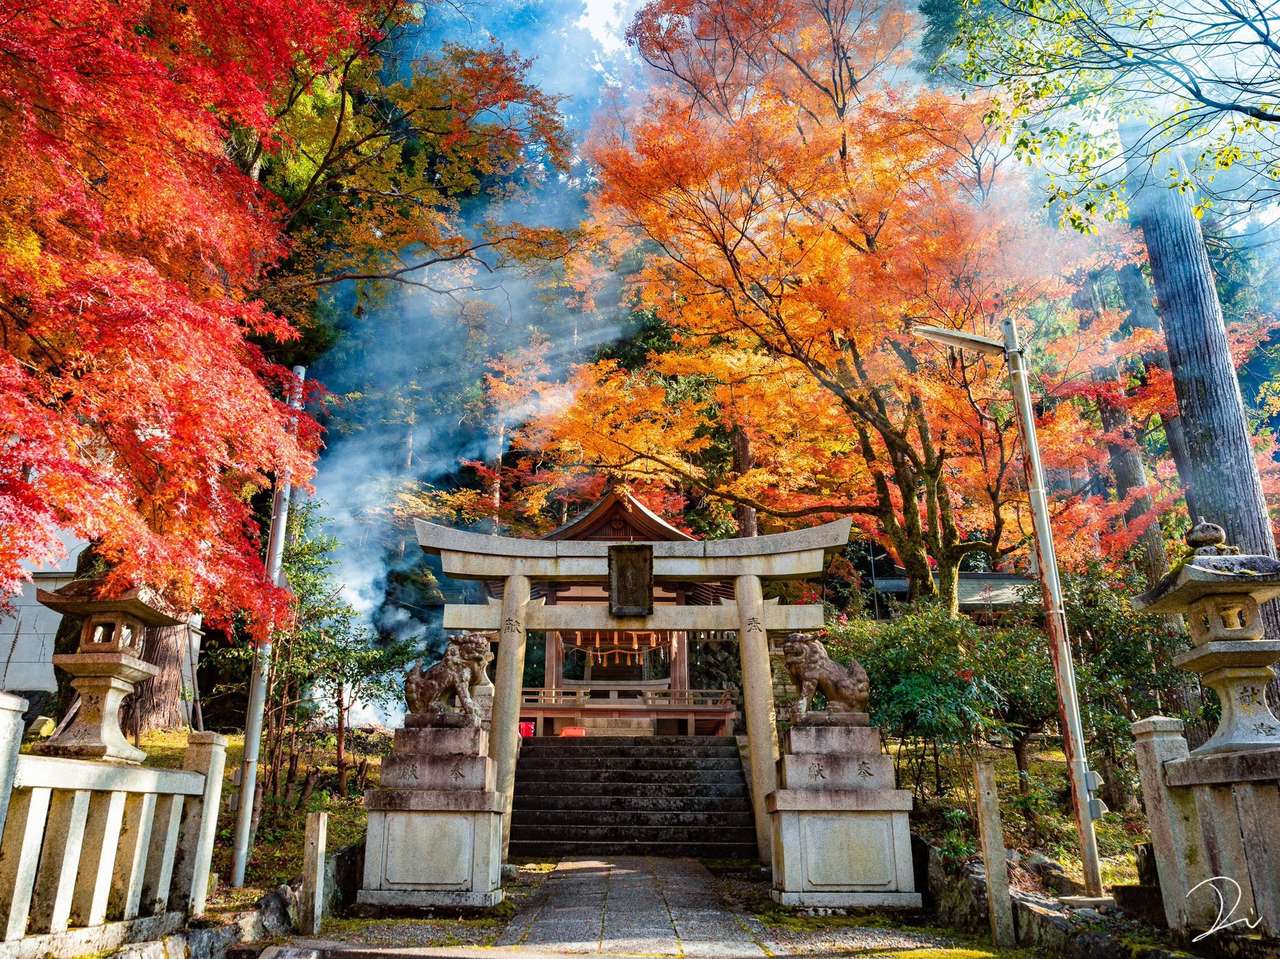 A beautiful image of Japan online puzzle